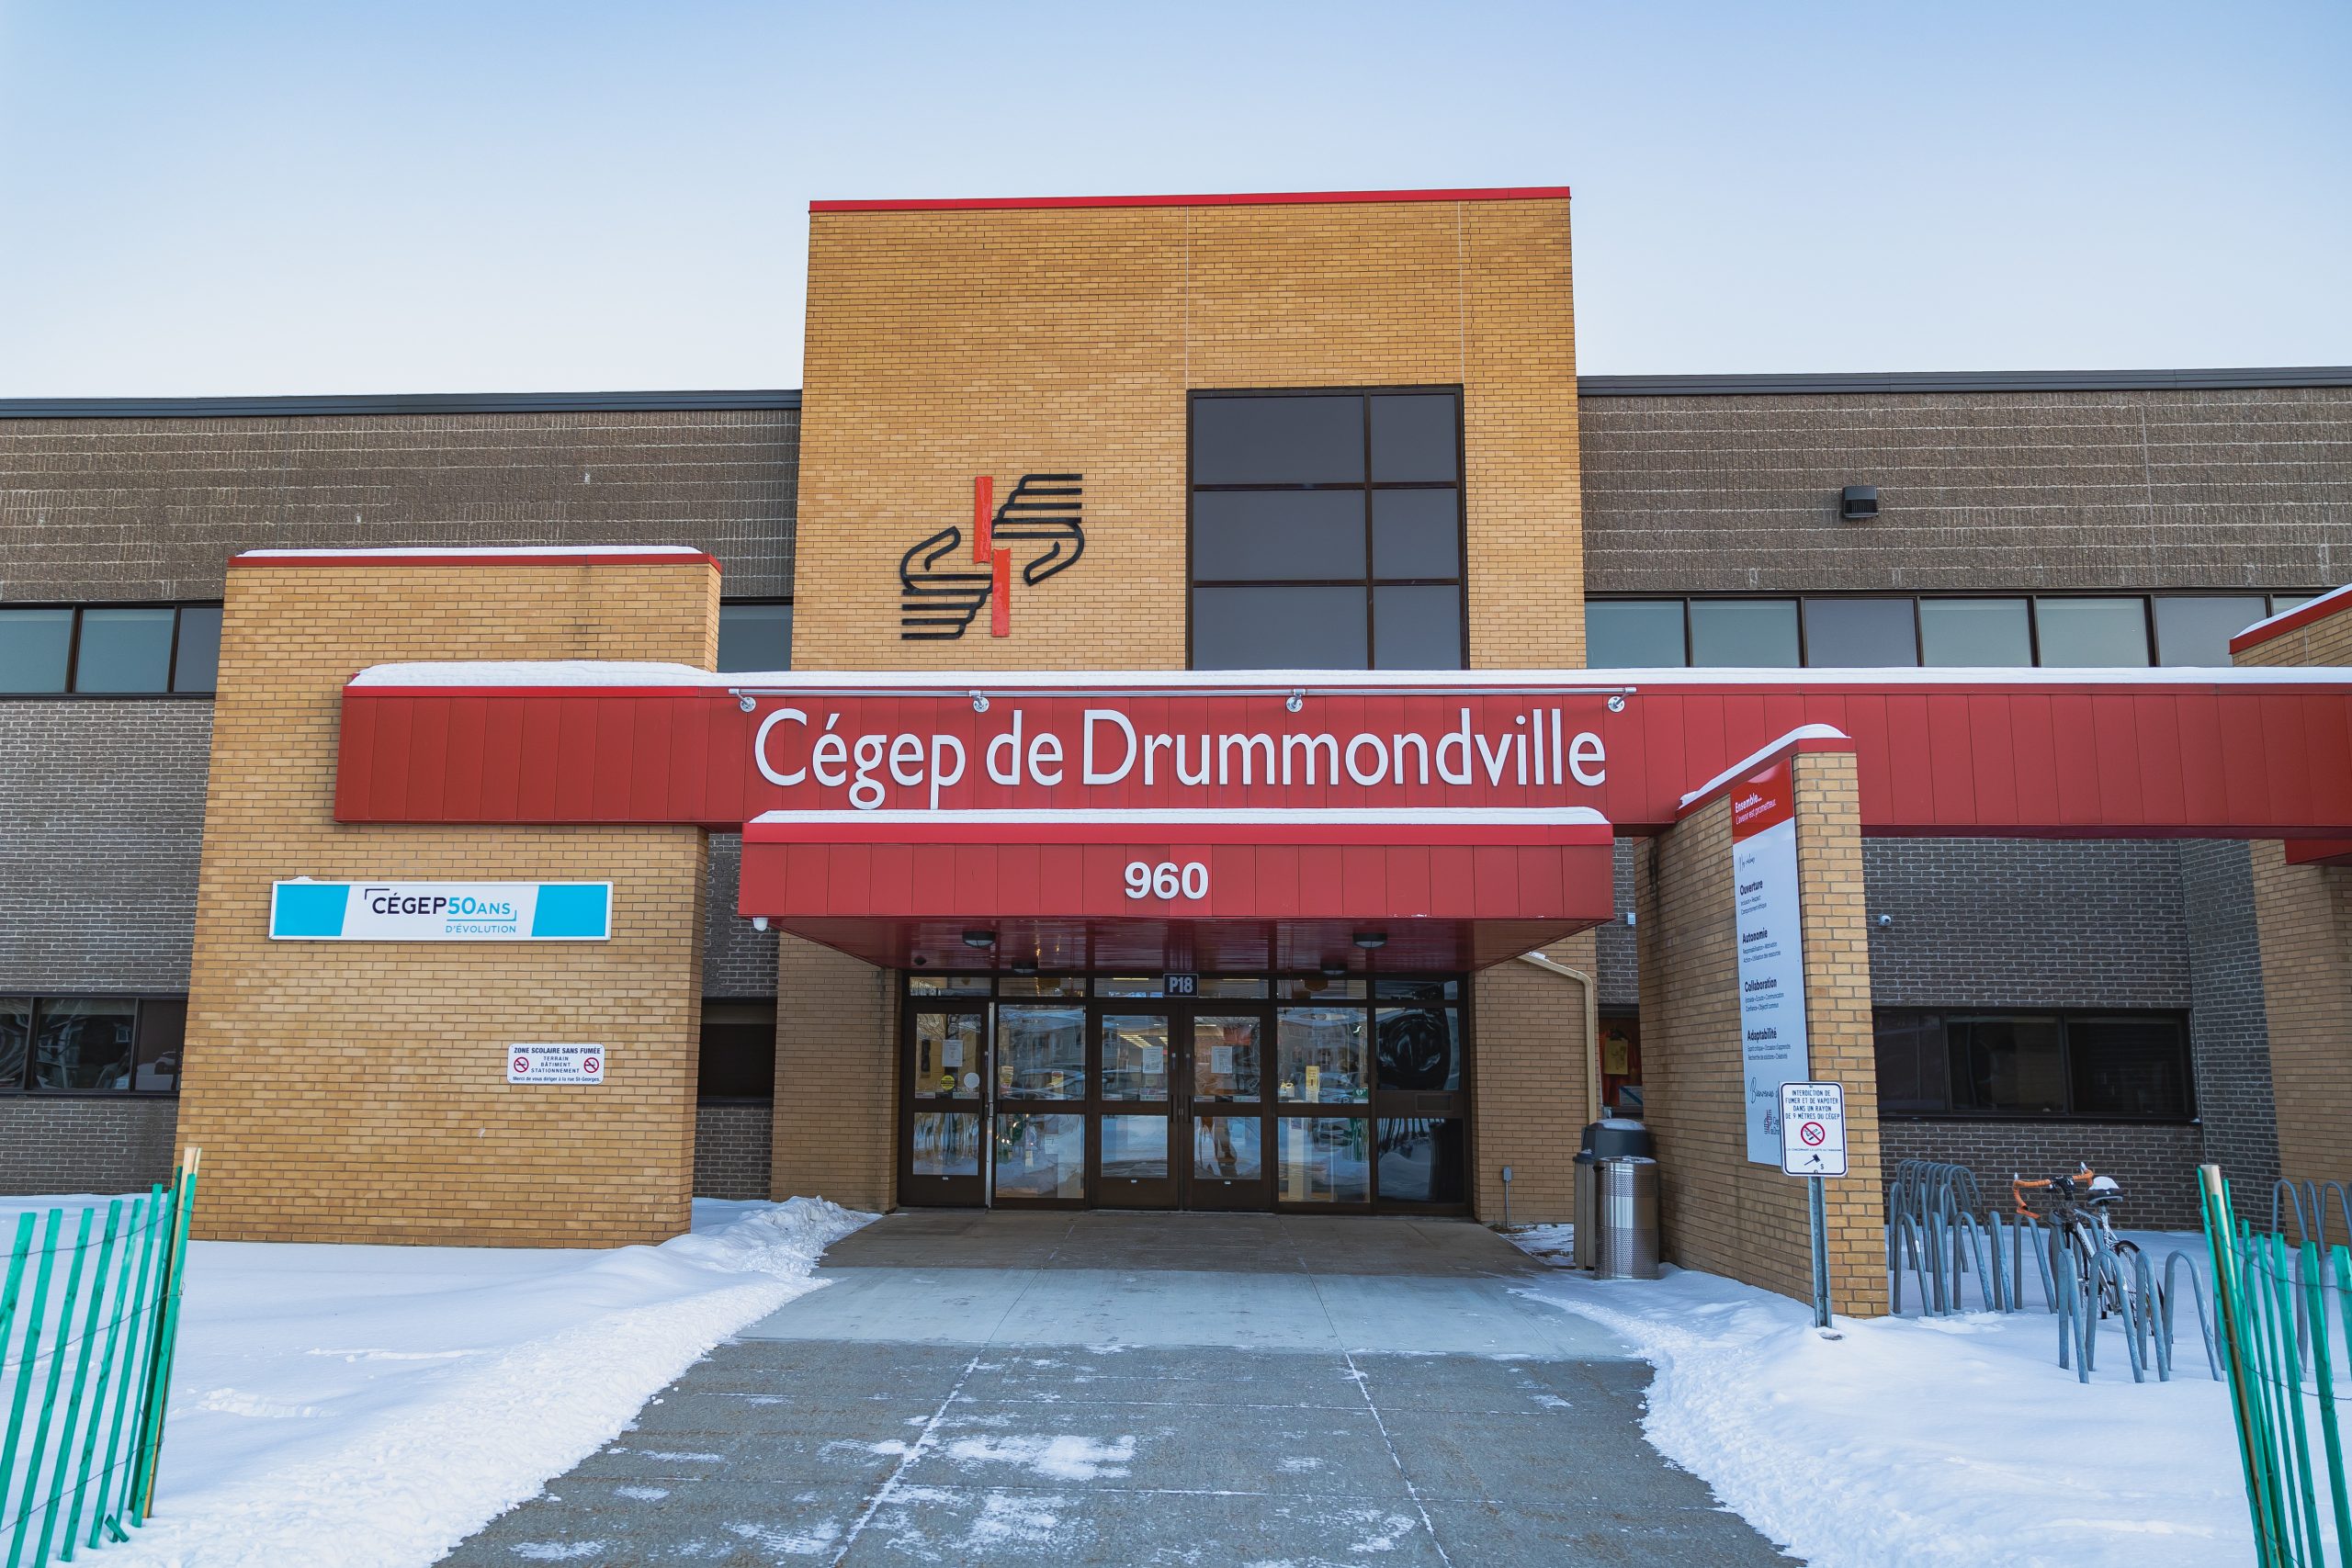 A place for open doors in continuing education at Cégep